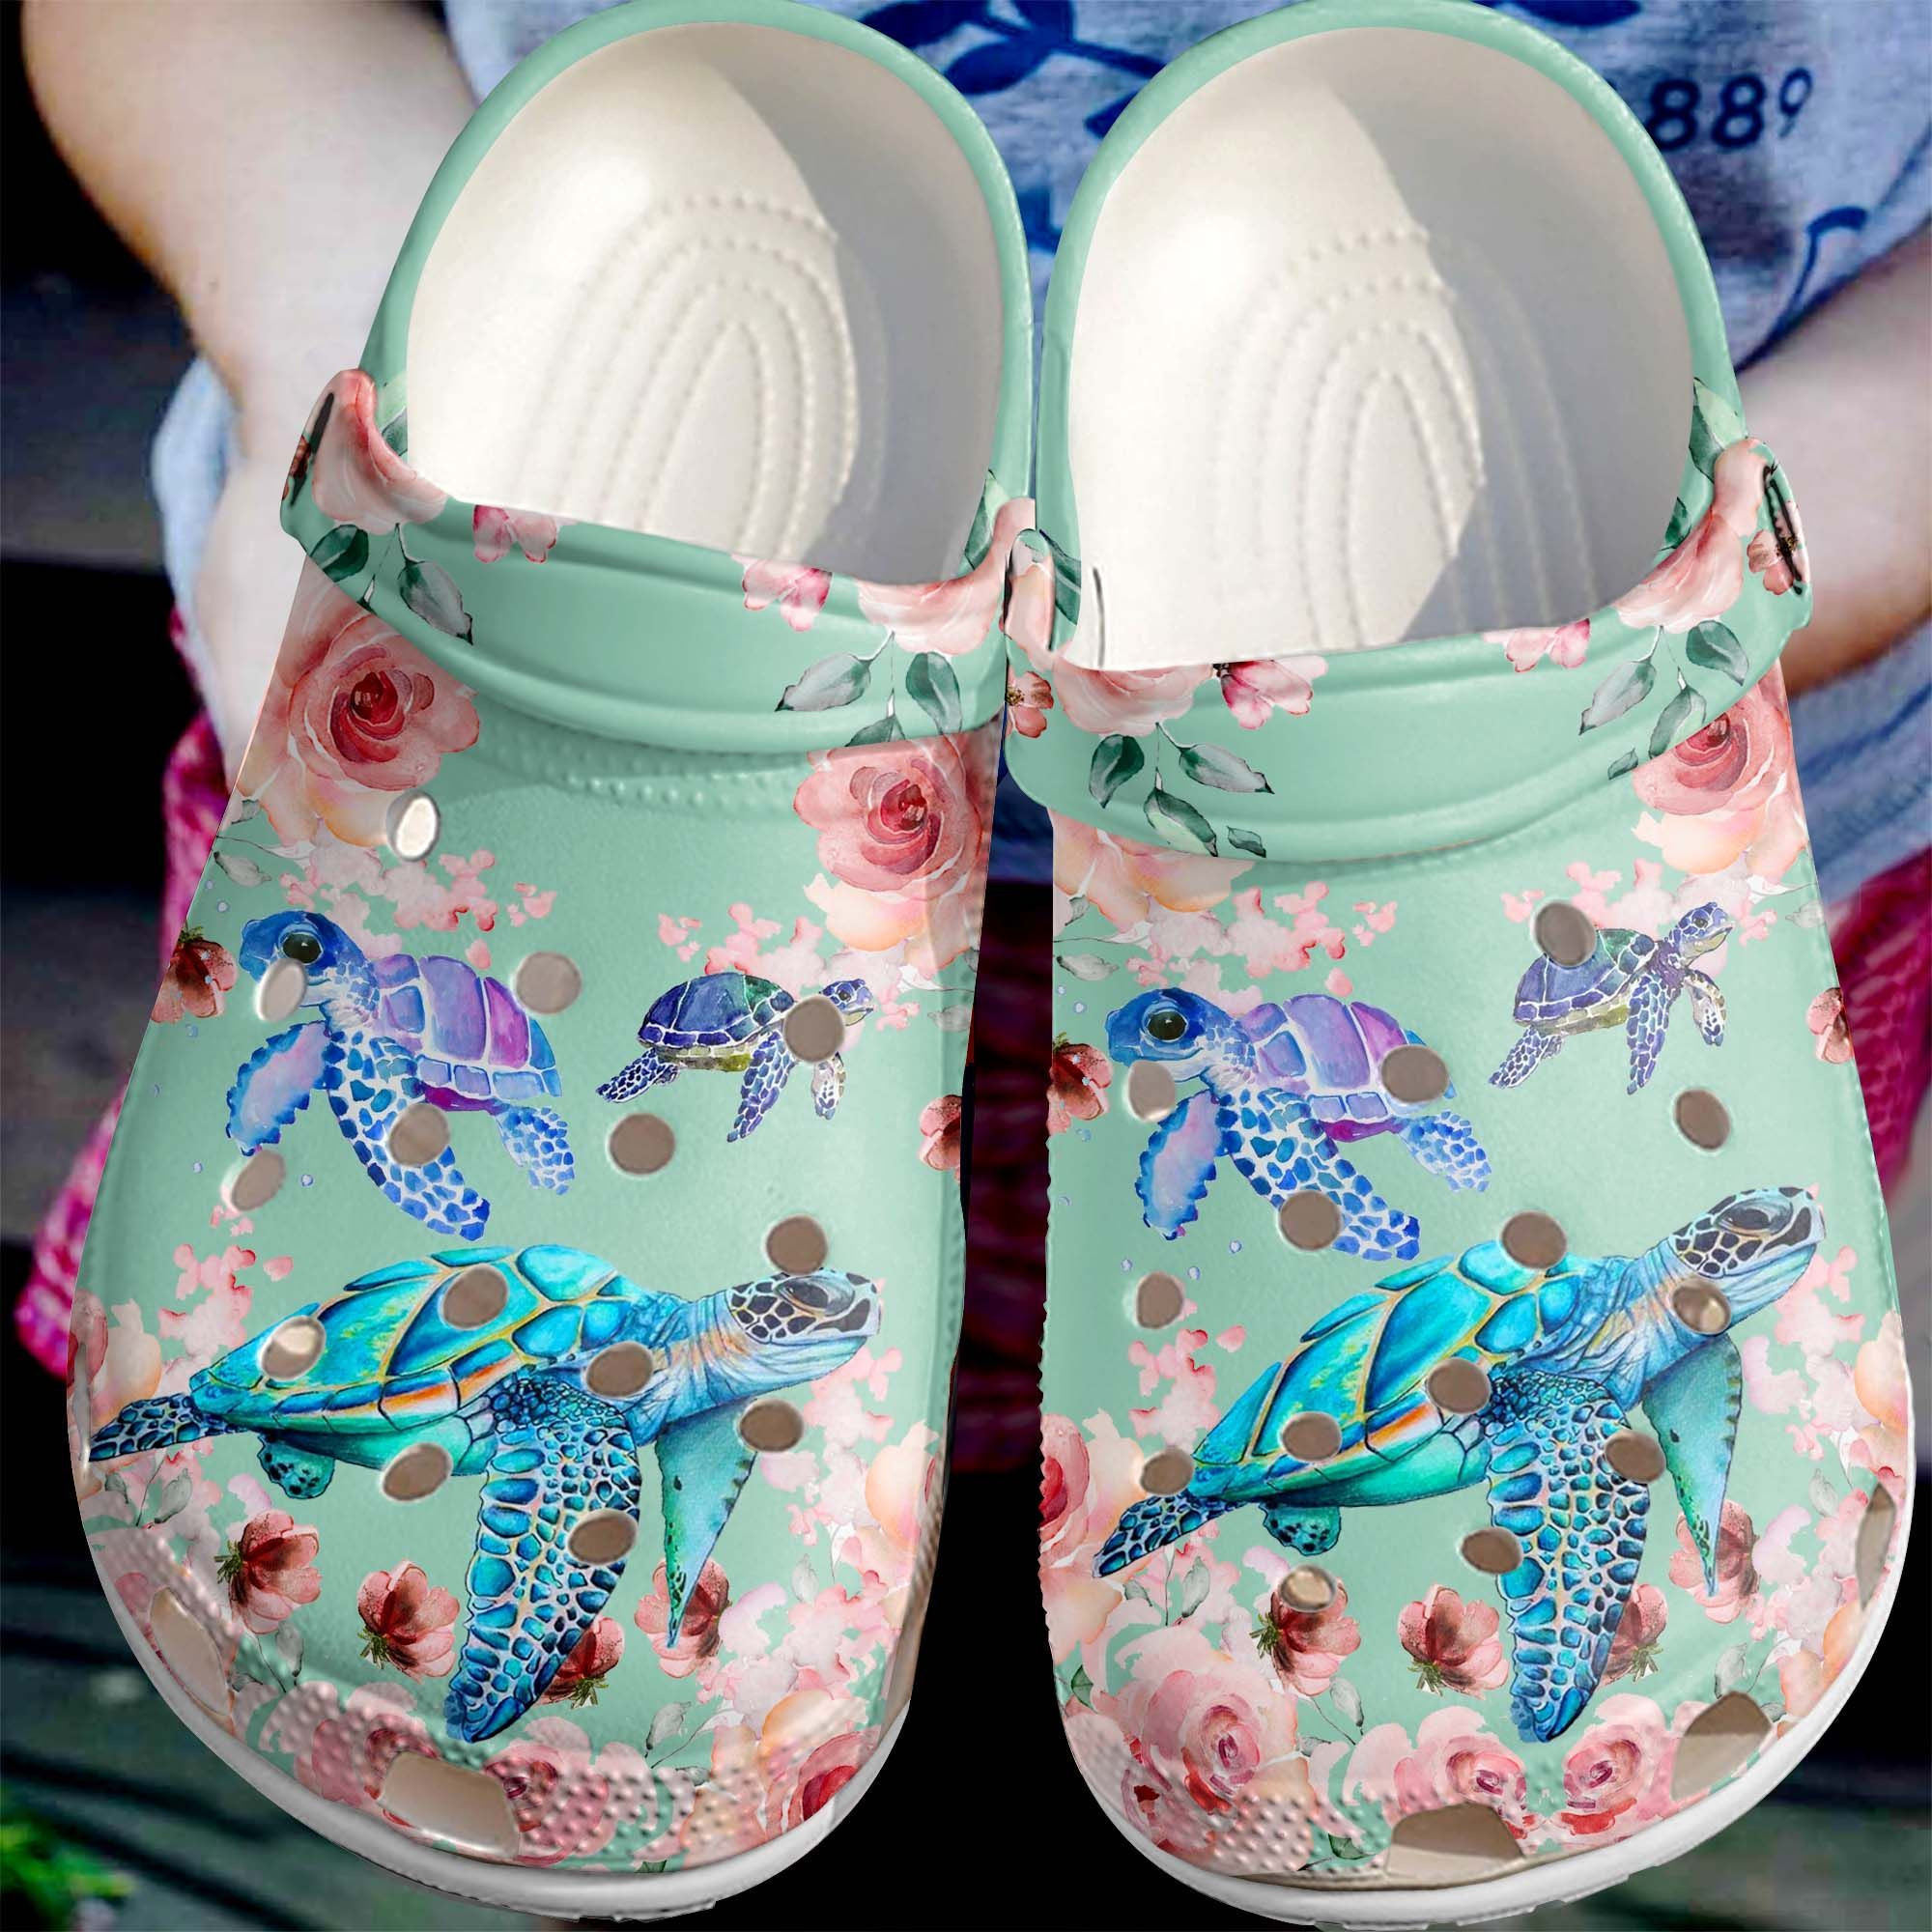 Sea Turtles With Roses Shoes Crocs Beautiful Ocean Flower Shoes Crocbland Clog For Women Mother Sister Daughter Niece Friend